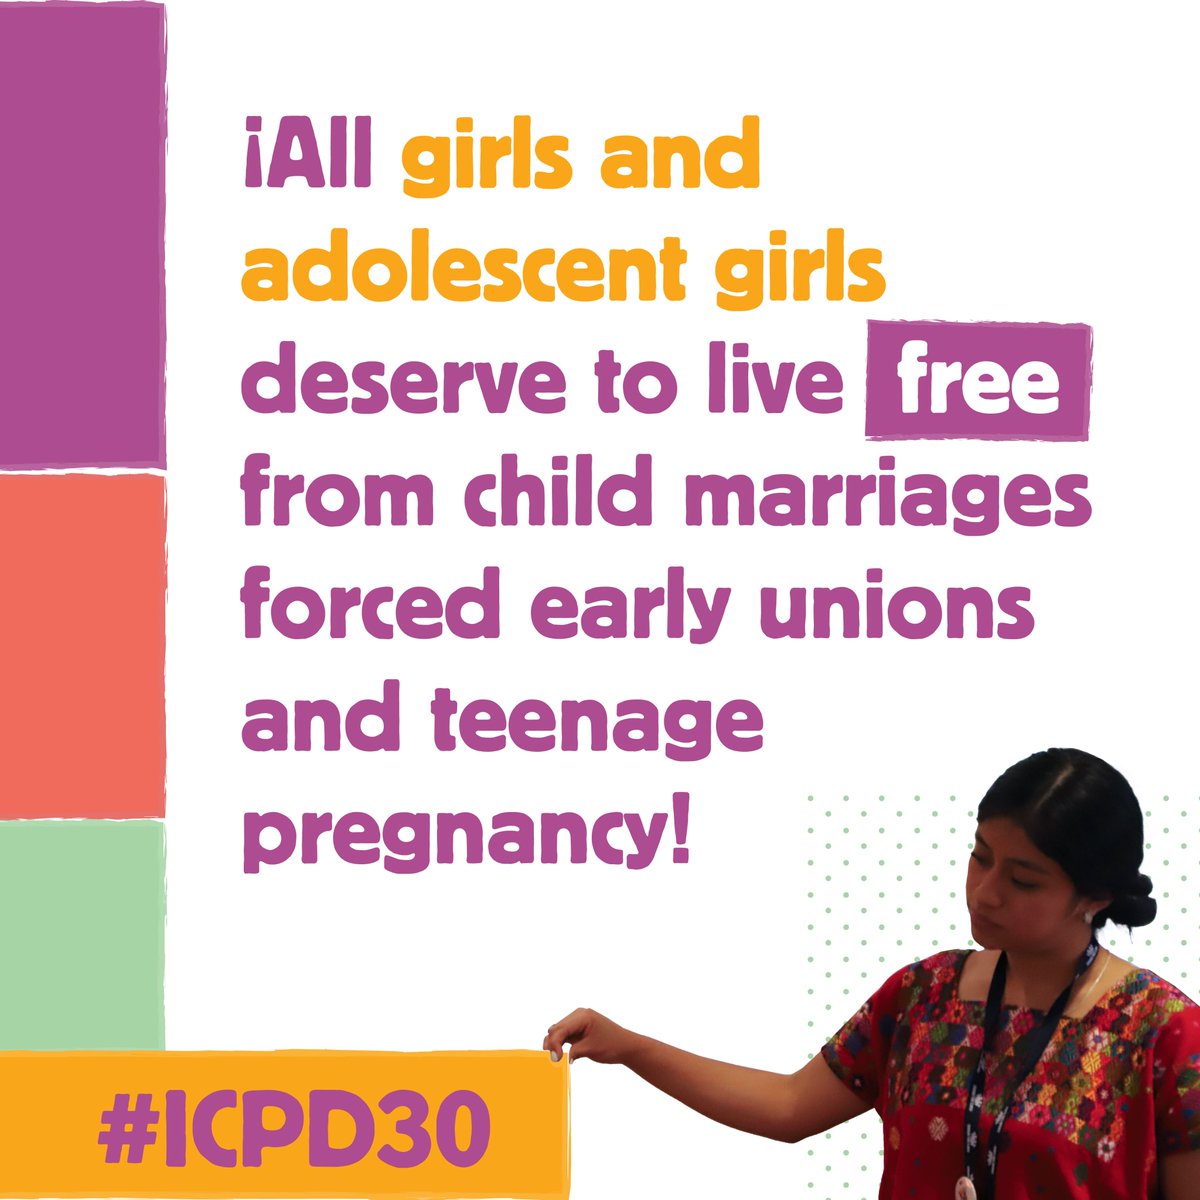 🌟At #ICPD30, let's prioritise sexual and reproductive rights and health for all girls and adolescents to #EndChildMarriage. Every girl deserves the right to control her own future and make empowered choices! #SRHR #CPD57